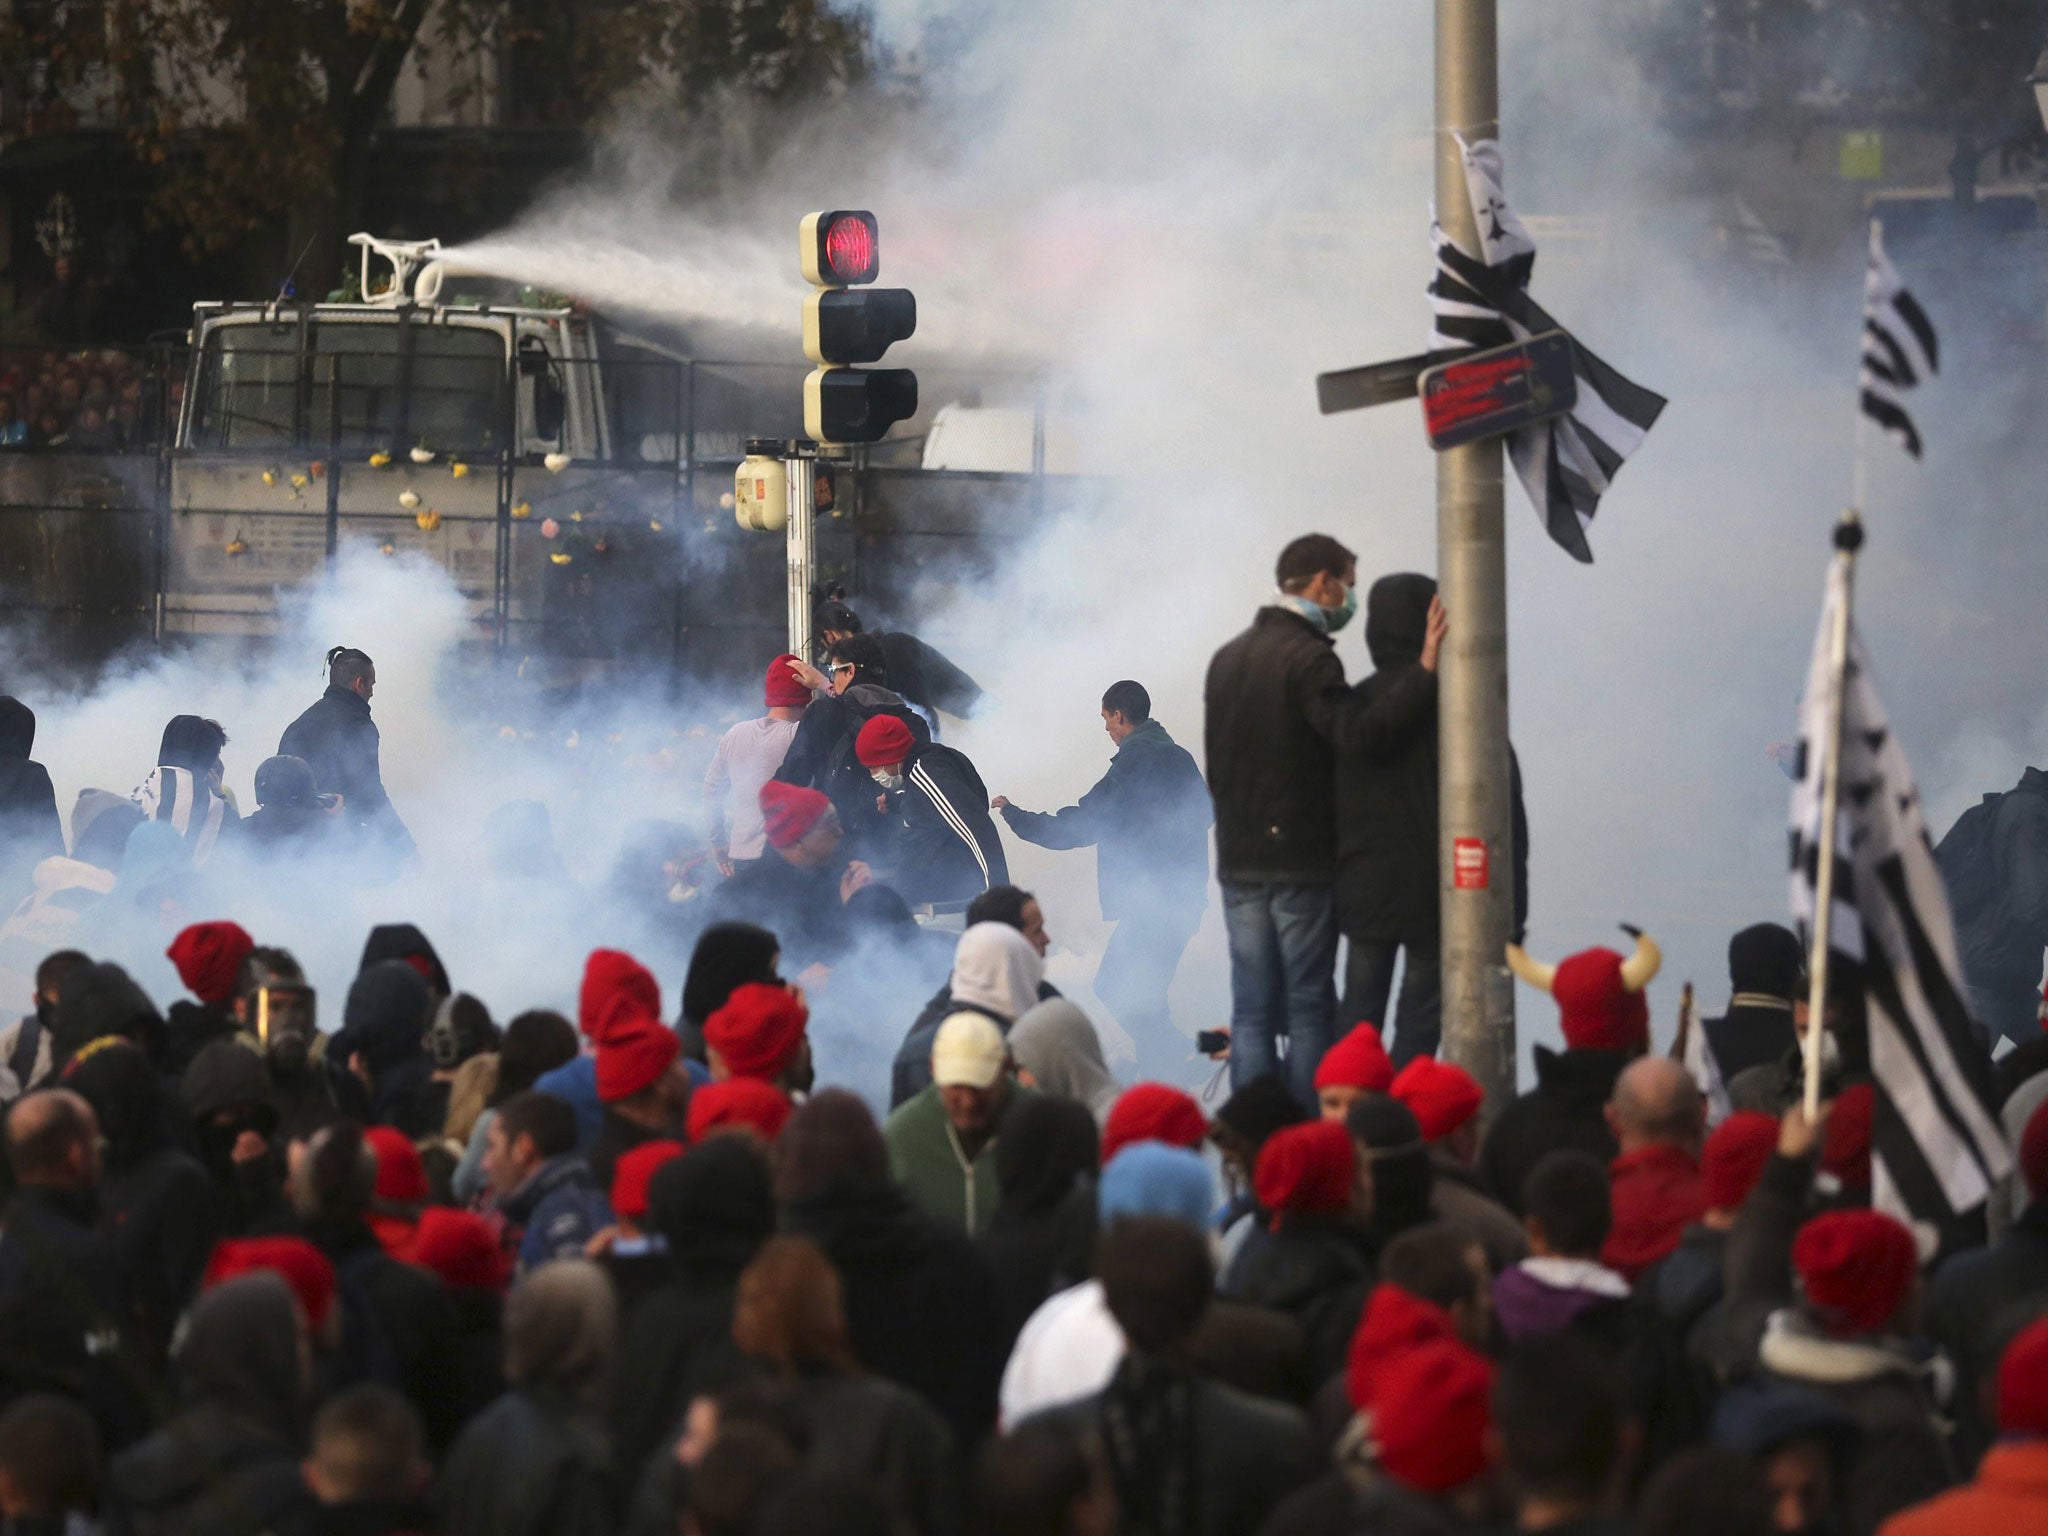 Breton 'red-bonnet' protesters show their anger at lay-offs and rising taxes, a feeling that is fast spreading across France